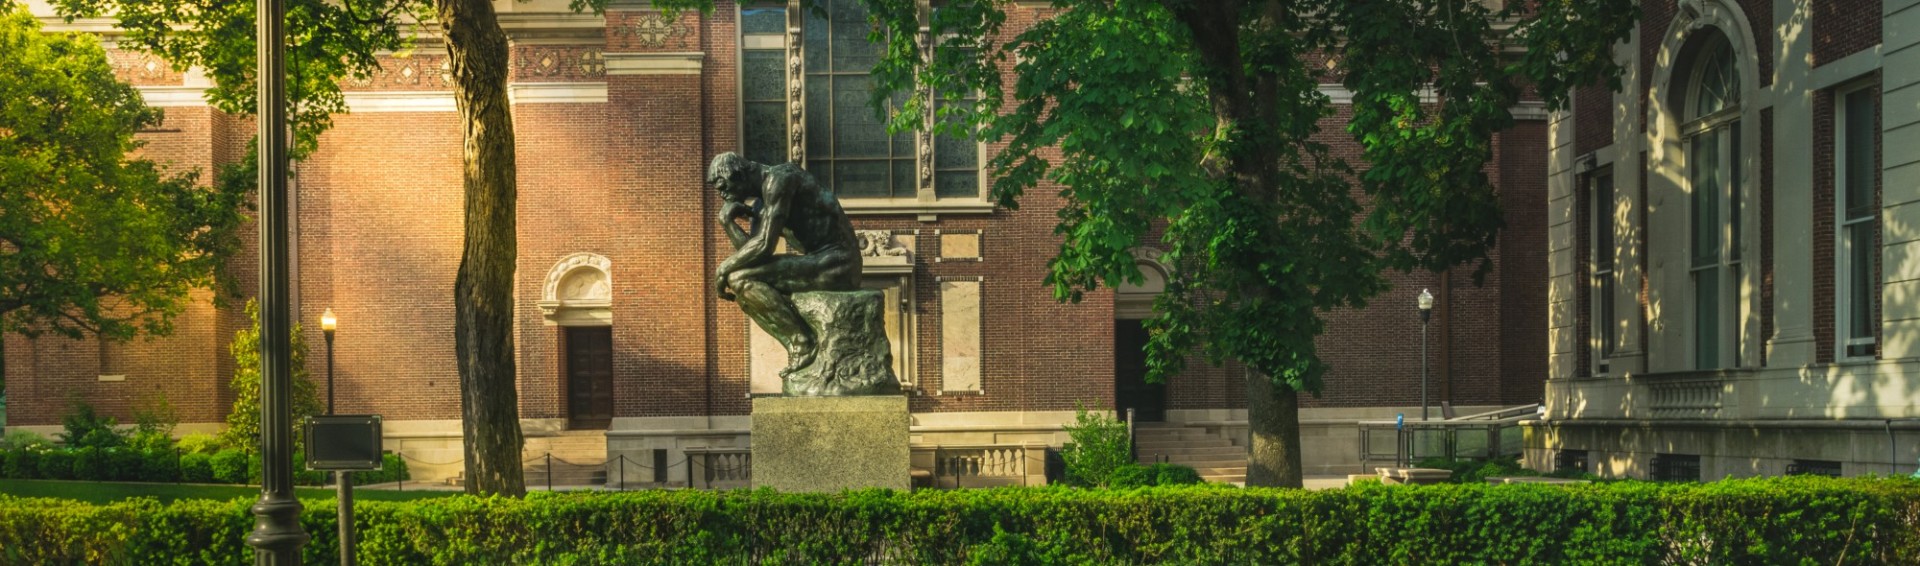 Auguste Rodin's sculpture The Thinker, sits in a sunlit lawn on Columbia University's campus.